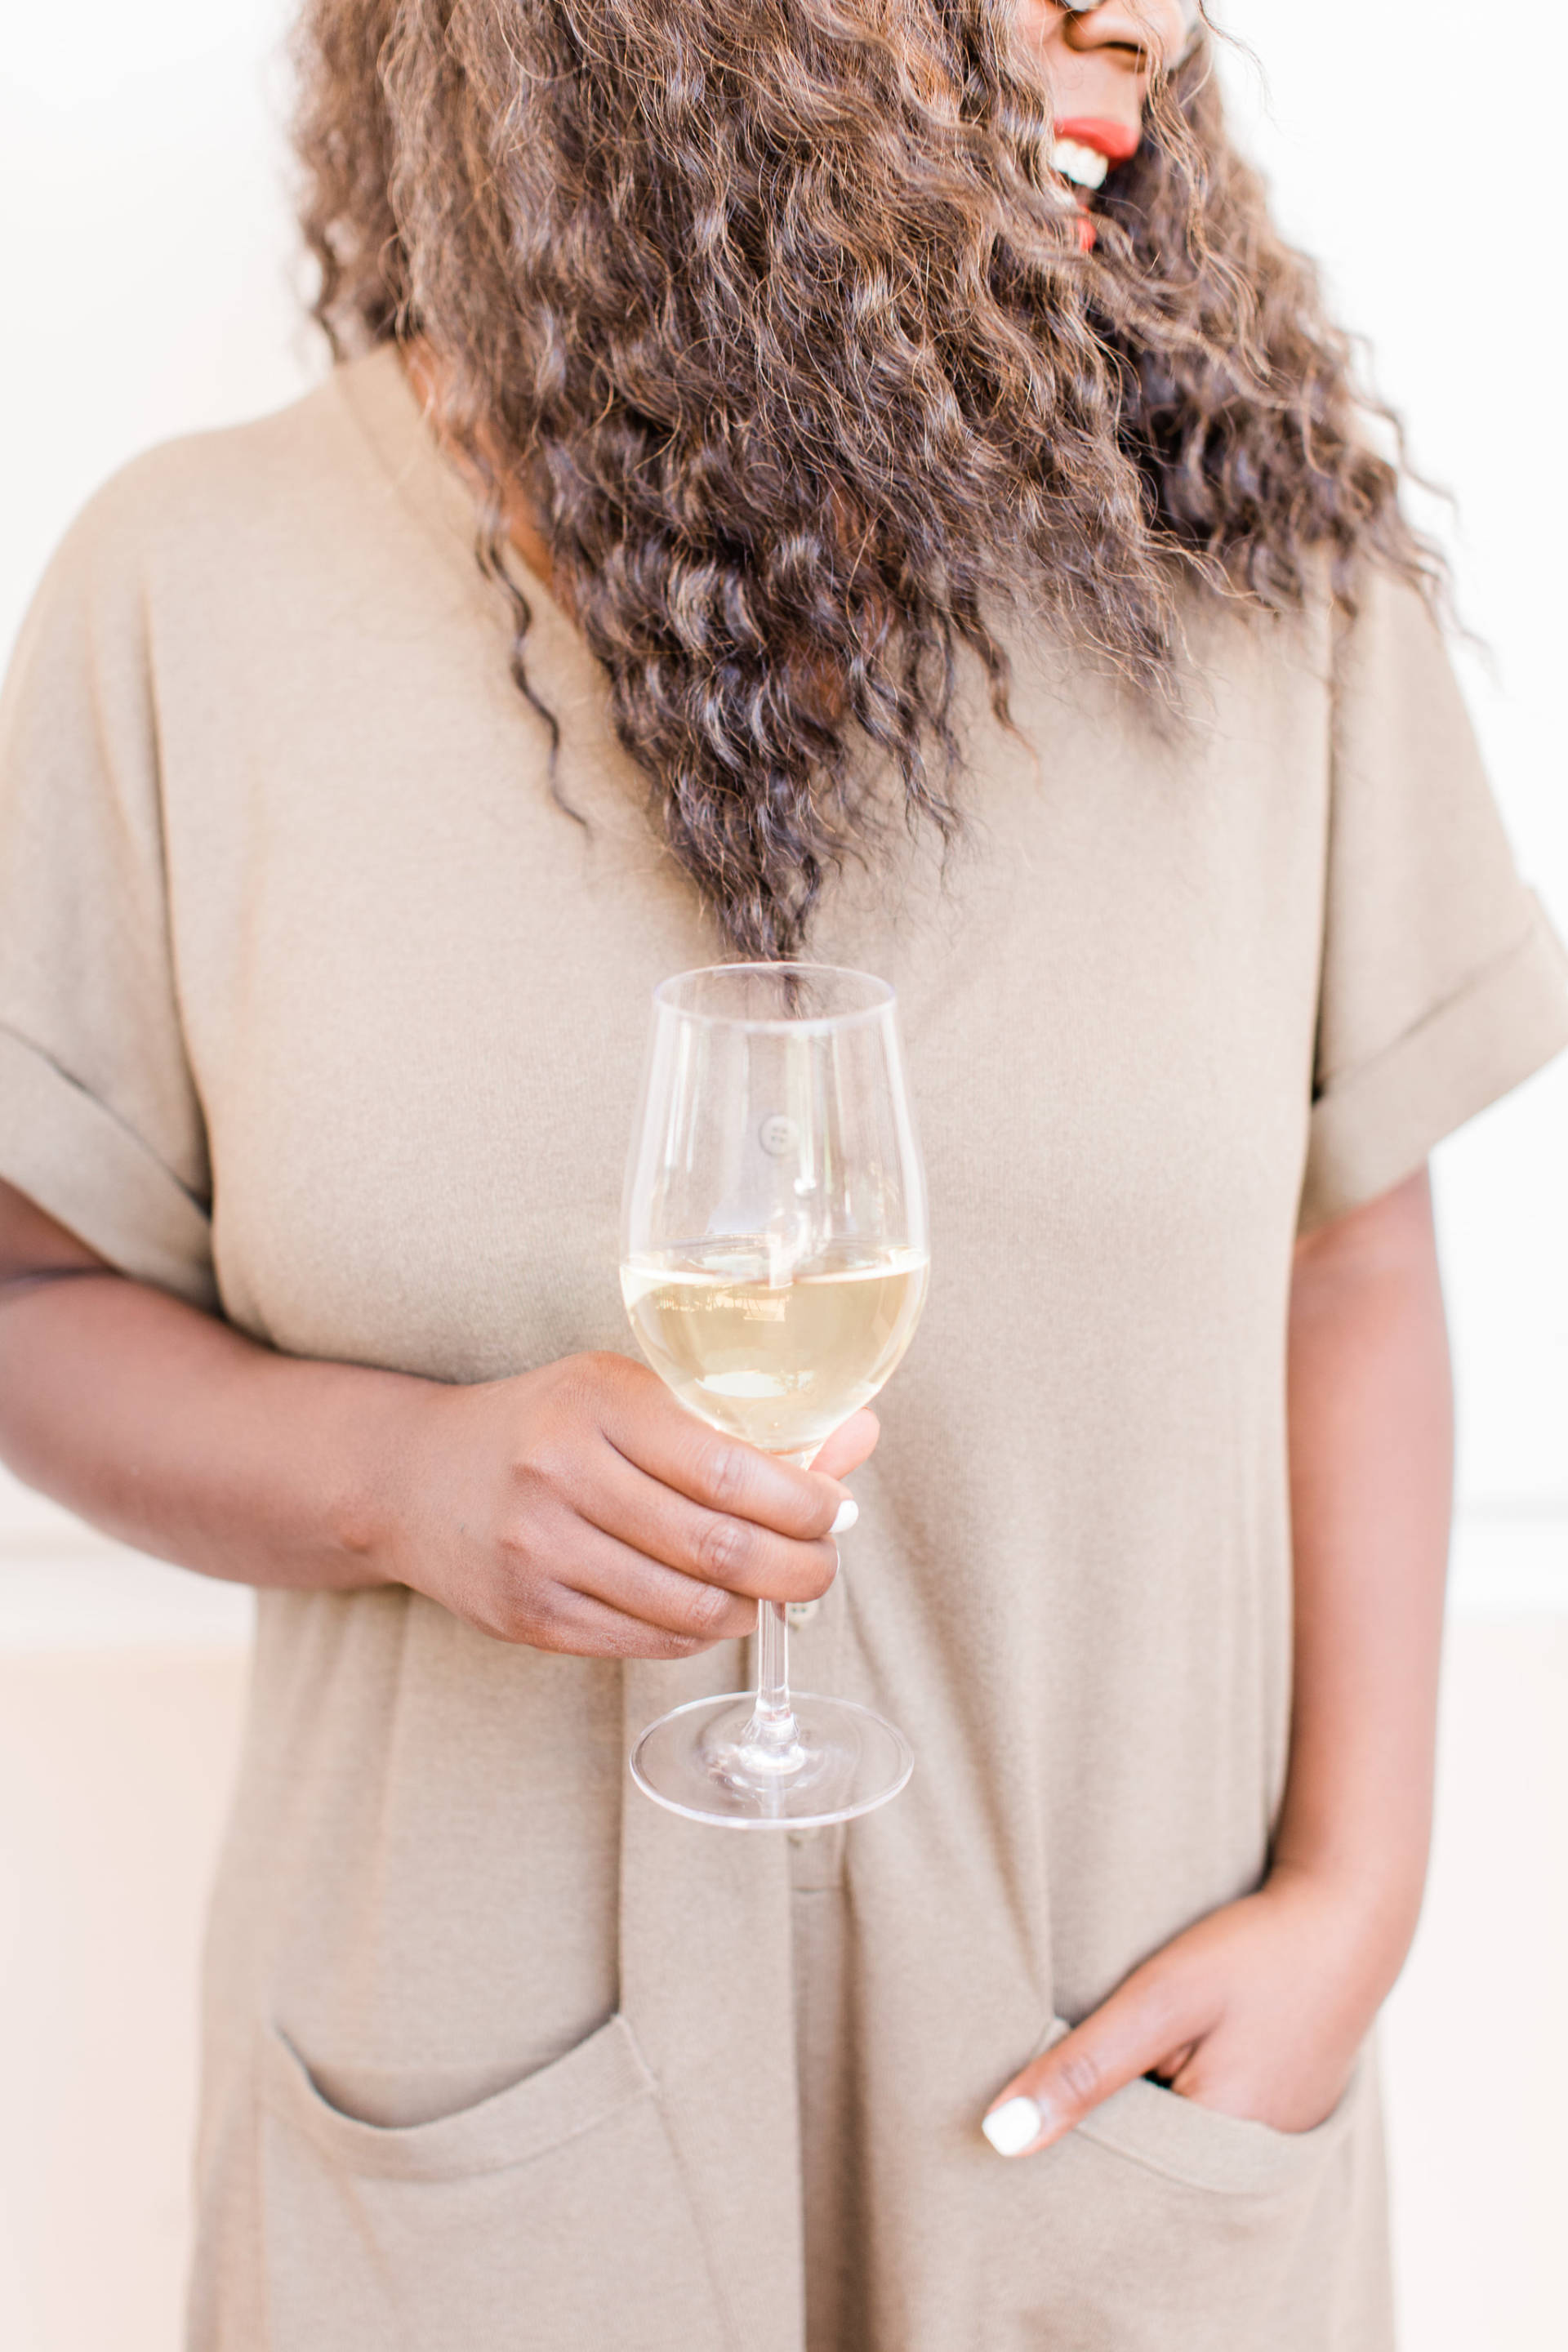 A woman wearing a shirt that almost matches her Cameron Hughes white wine